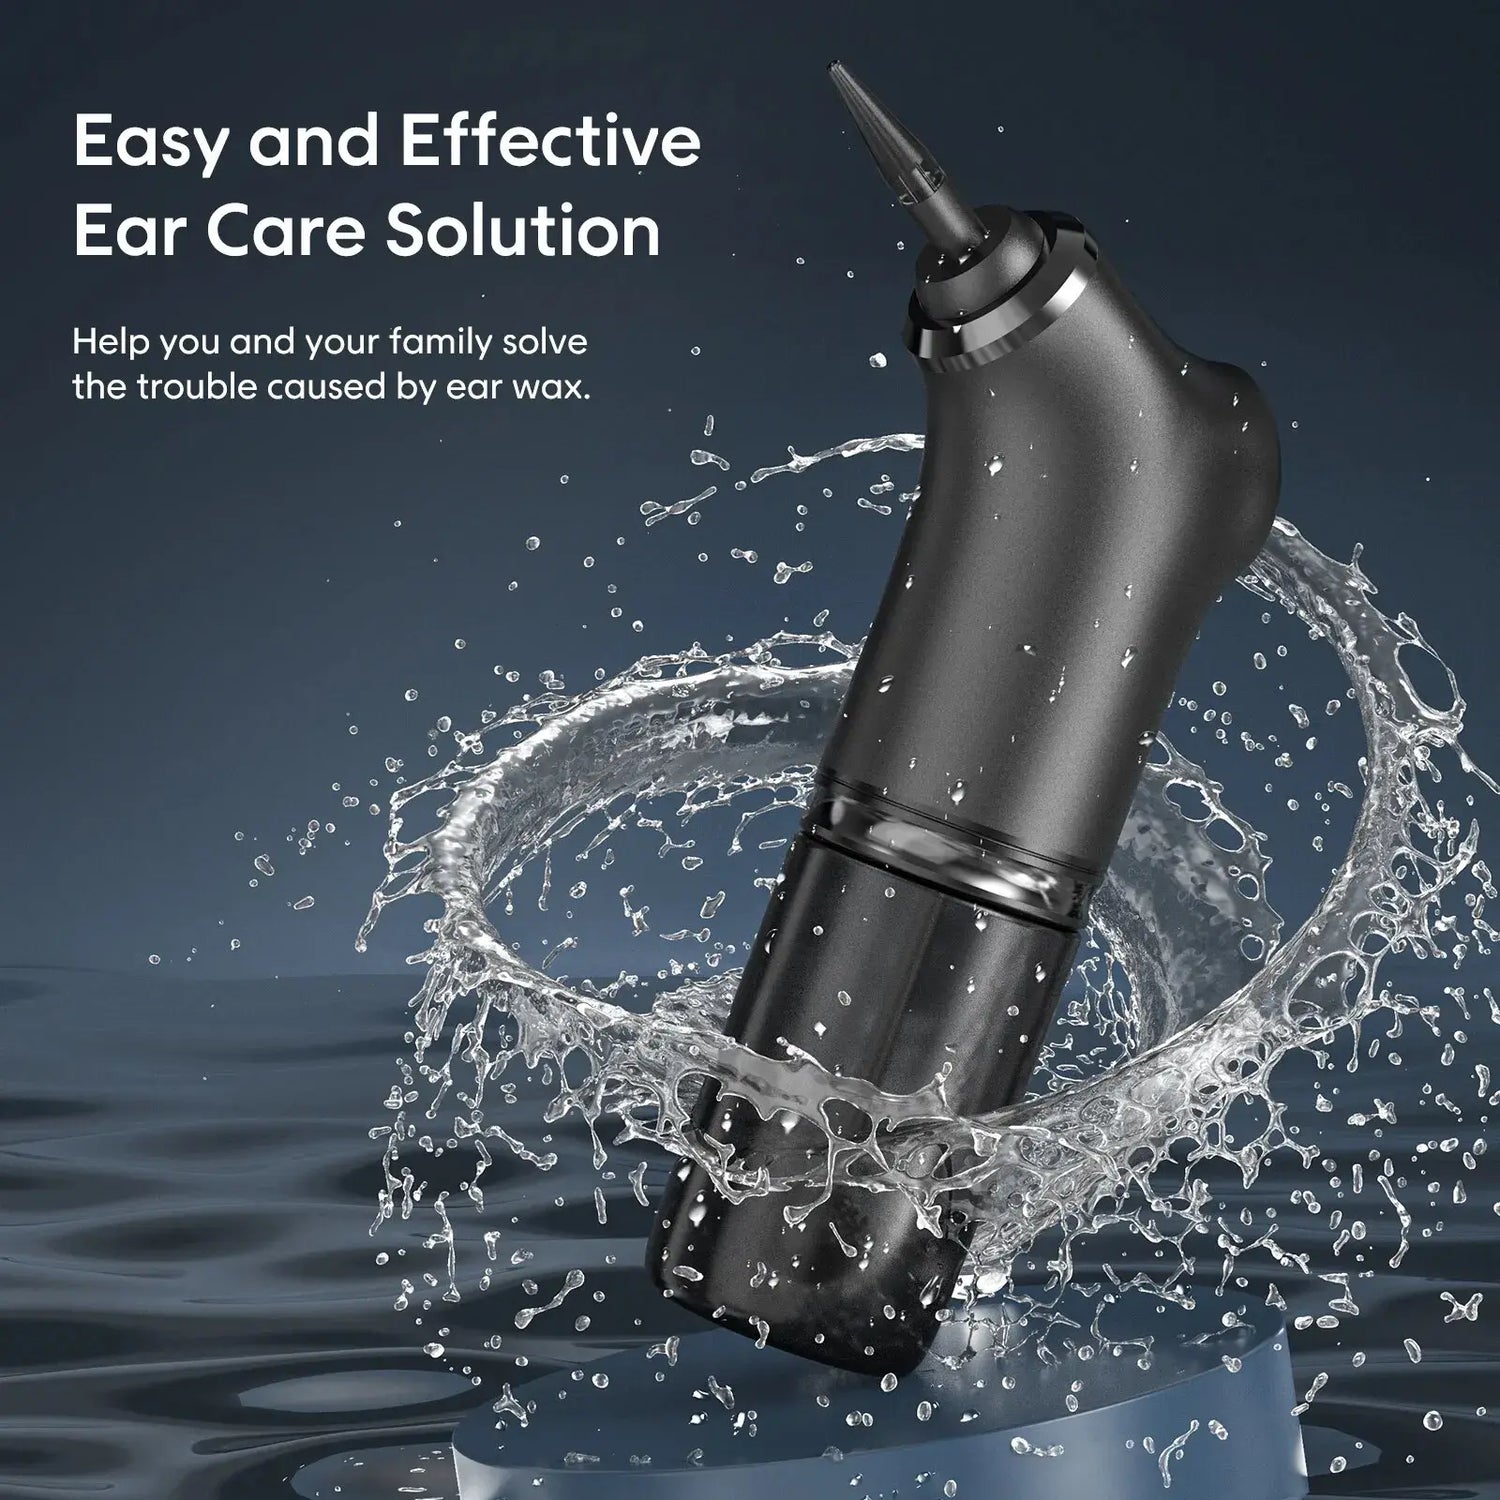 Electric Ear Cleaner - Assortique